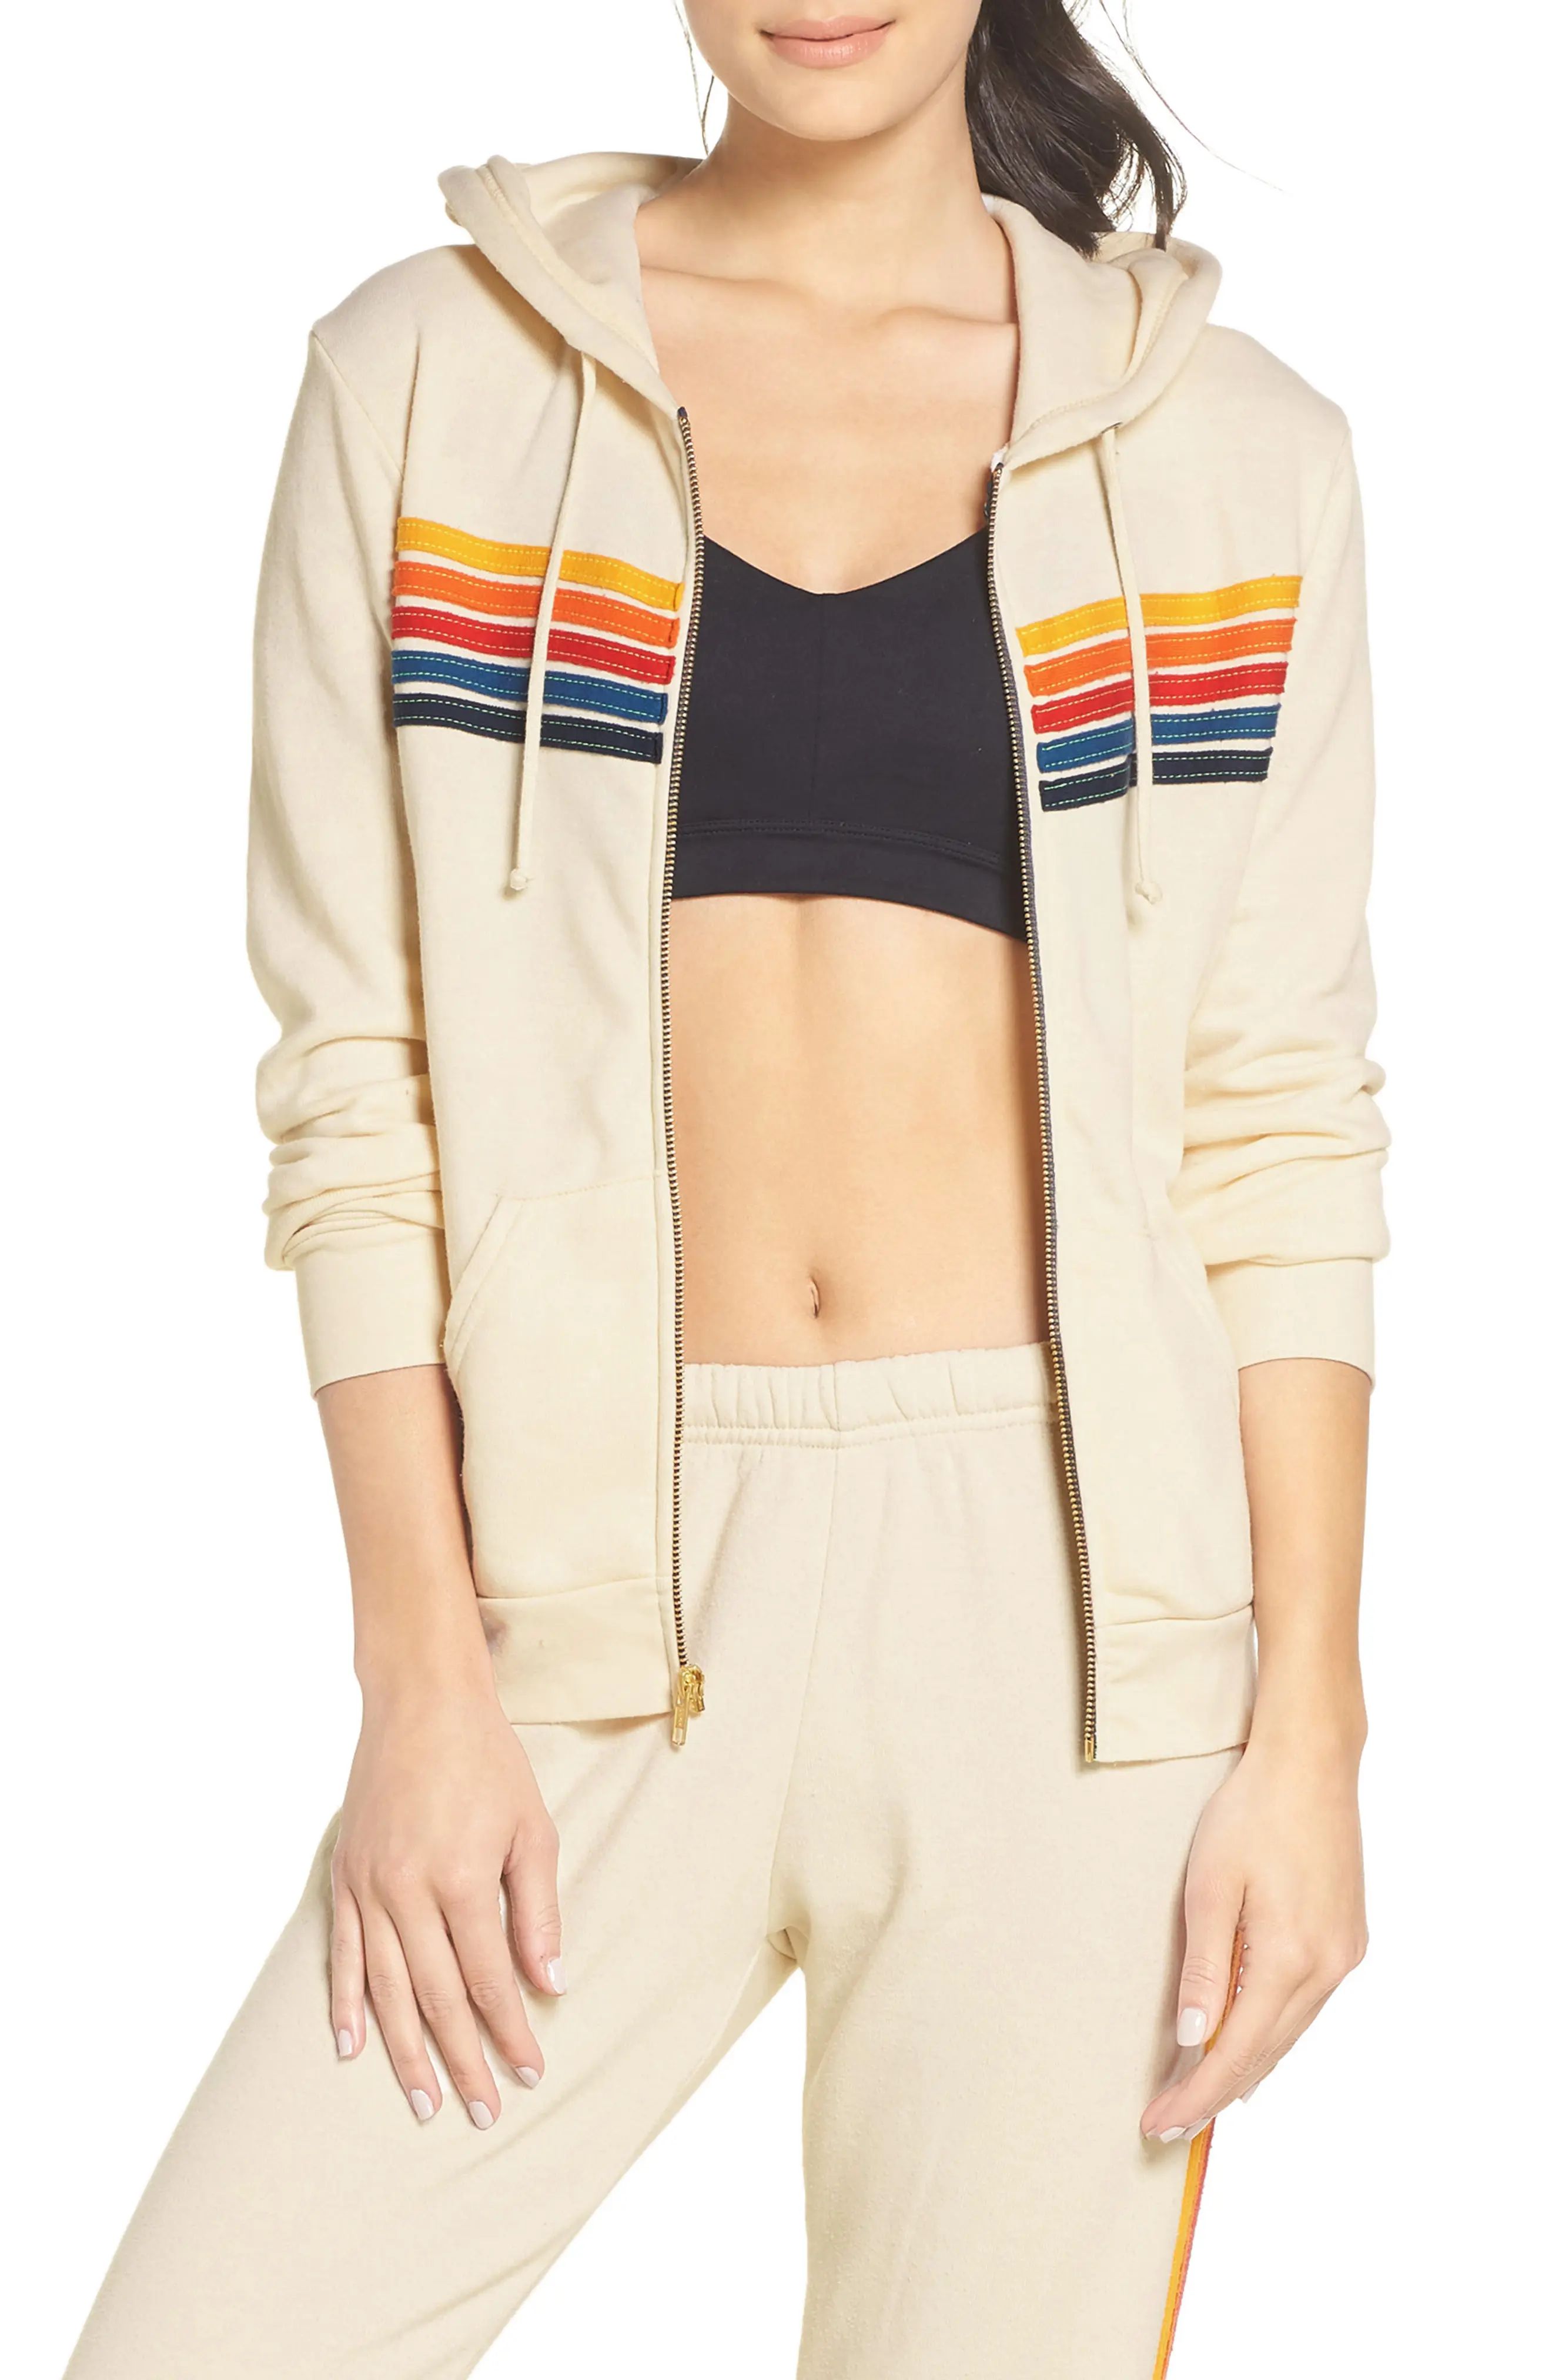 Aviator Nation 5-Stripe Zip Hoodie in Vintage White/Rainbow at Nordstrom, Size X-Small | Nordstrom